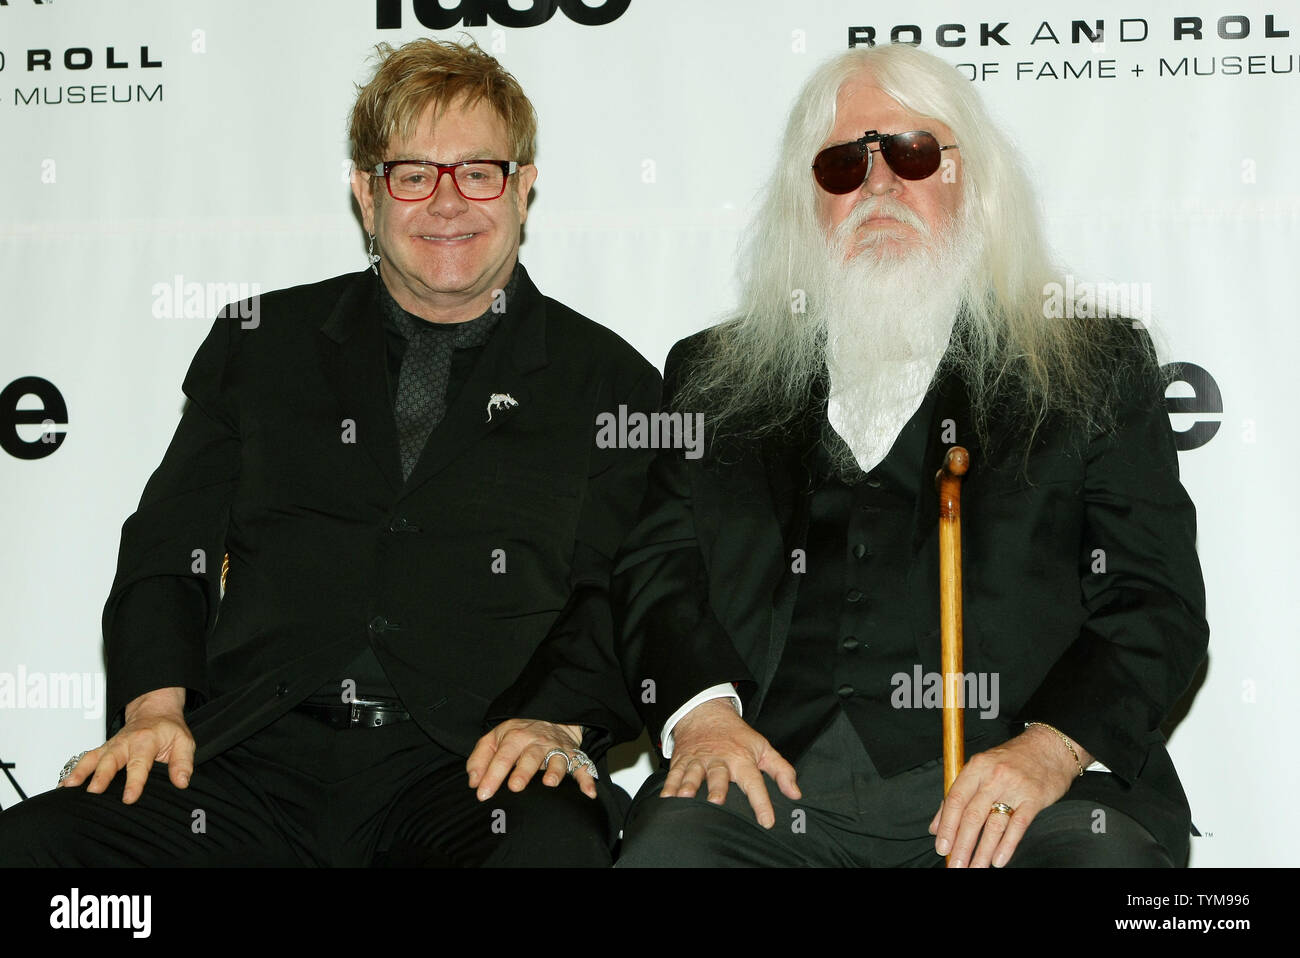 Elton John (L) and  inductee Leon Russell talk with reporters at the Rock and Roll Hall of Fame induction ceremony held at the Waldorf-Astoria hotel in New York on March 14, 2011.      UPI Photo/Monika Graff... Stock Photo